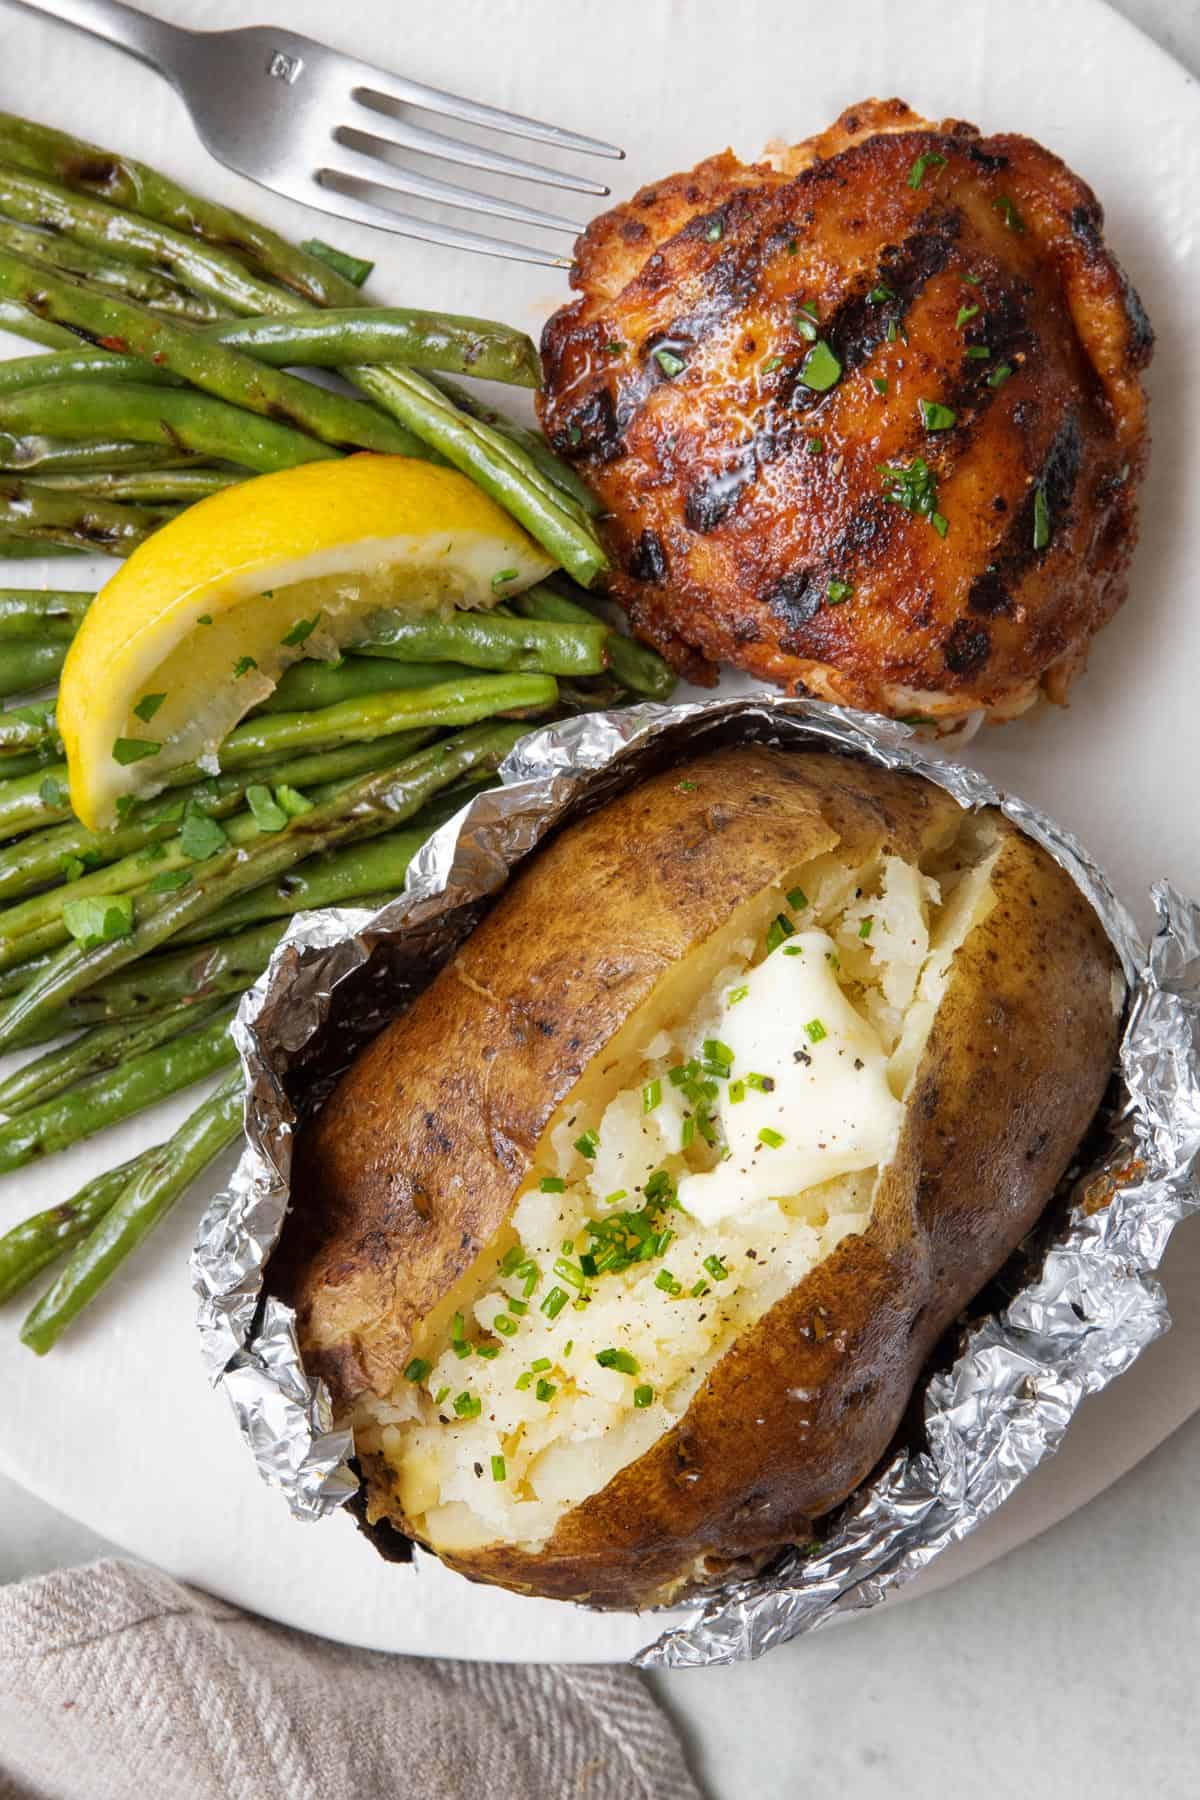 Grilled baked potato in foil split open and fluffed with butter, chives and salt plated with a grilled chicken thigh and fresh grilled string beans with a lemon wedge on top.